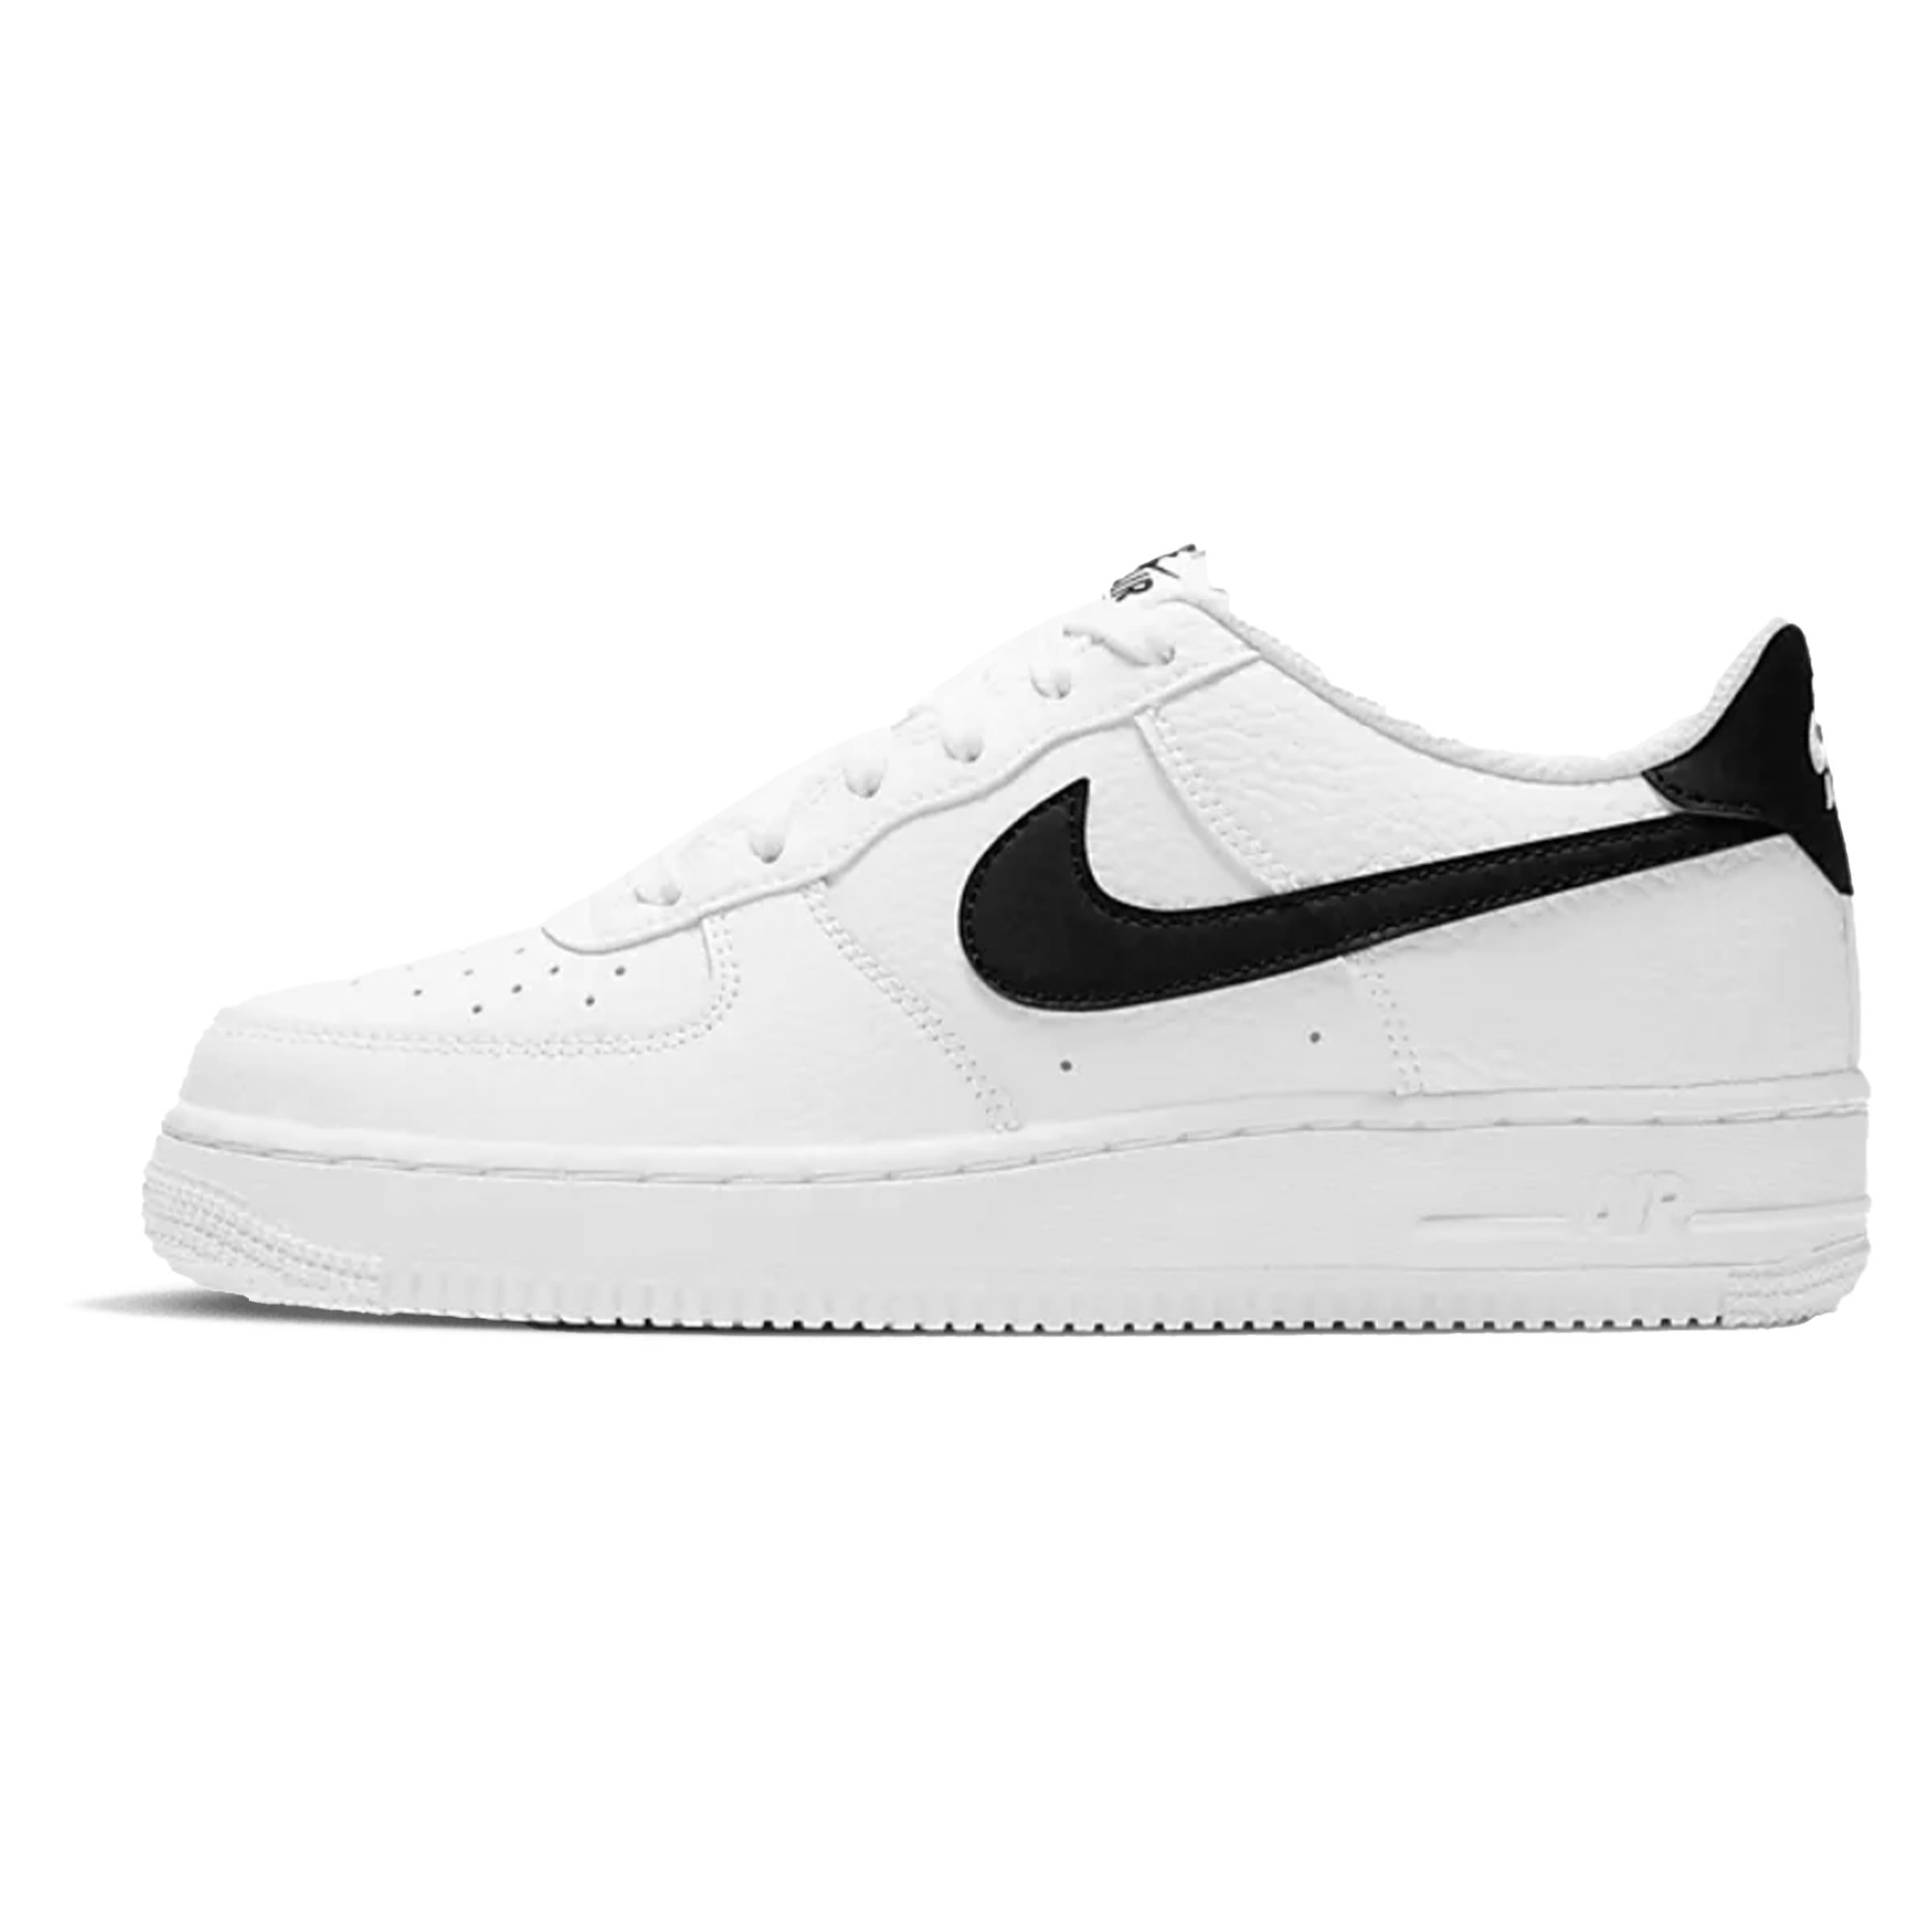 Air Force 1 '07 "White Black Pebbled Leather"